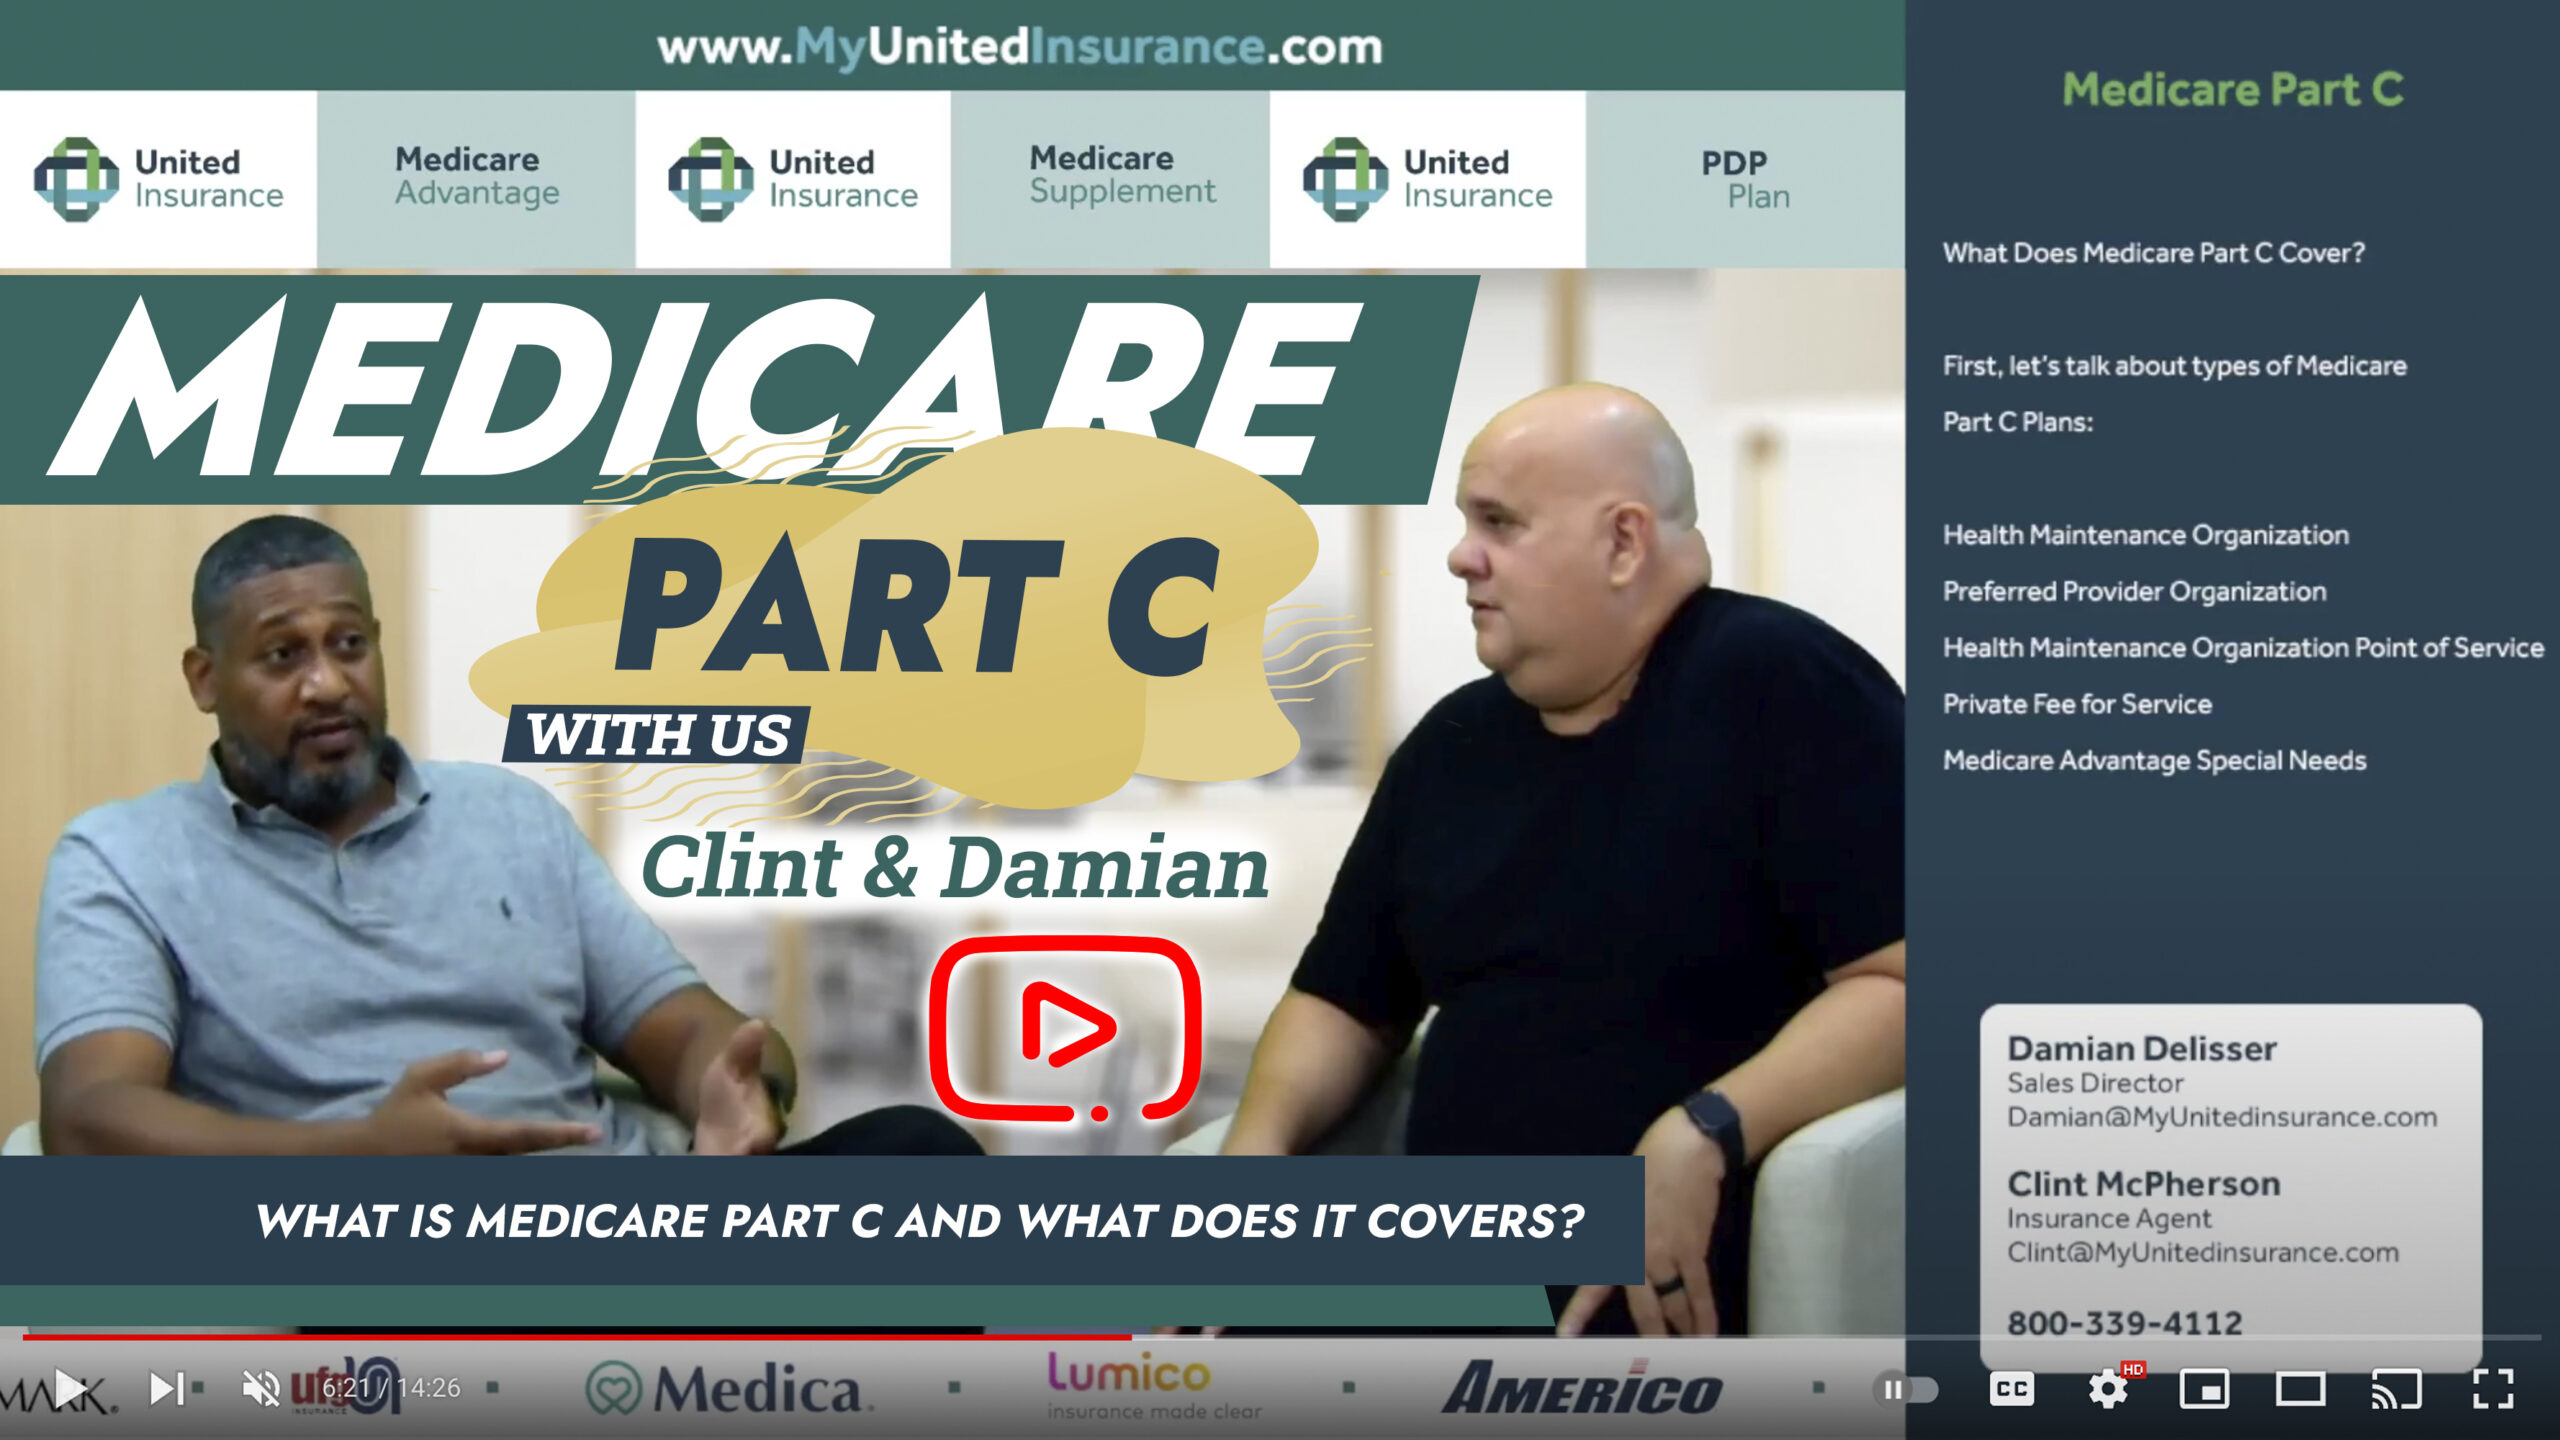 What is Medicare Part C?